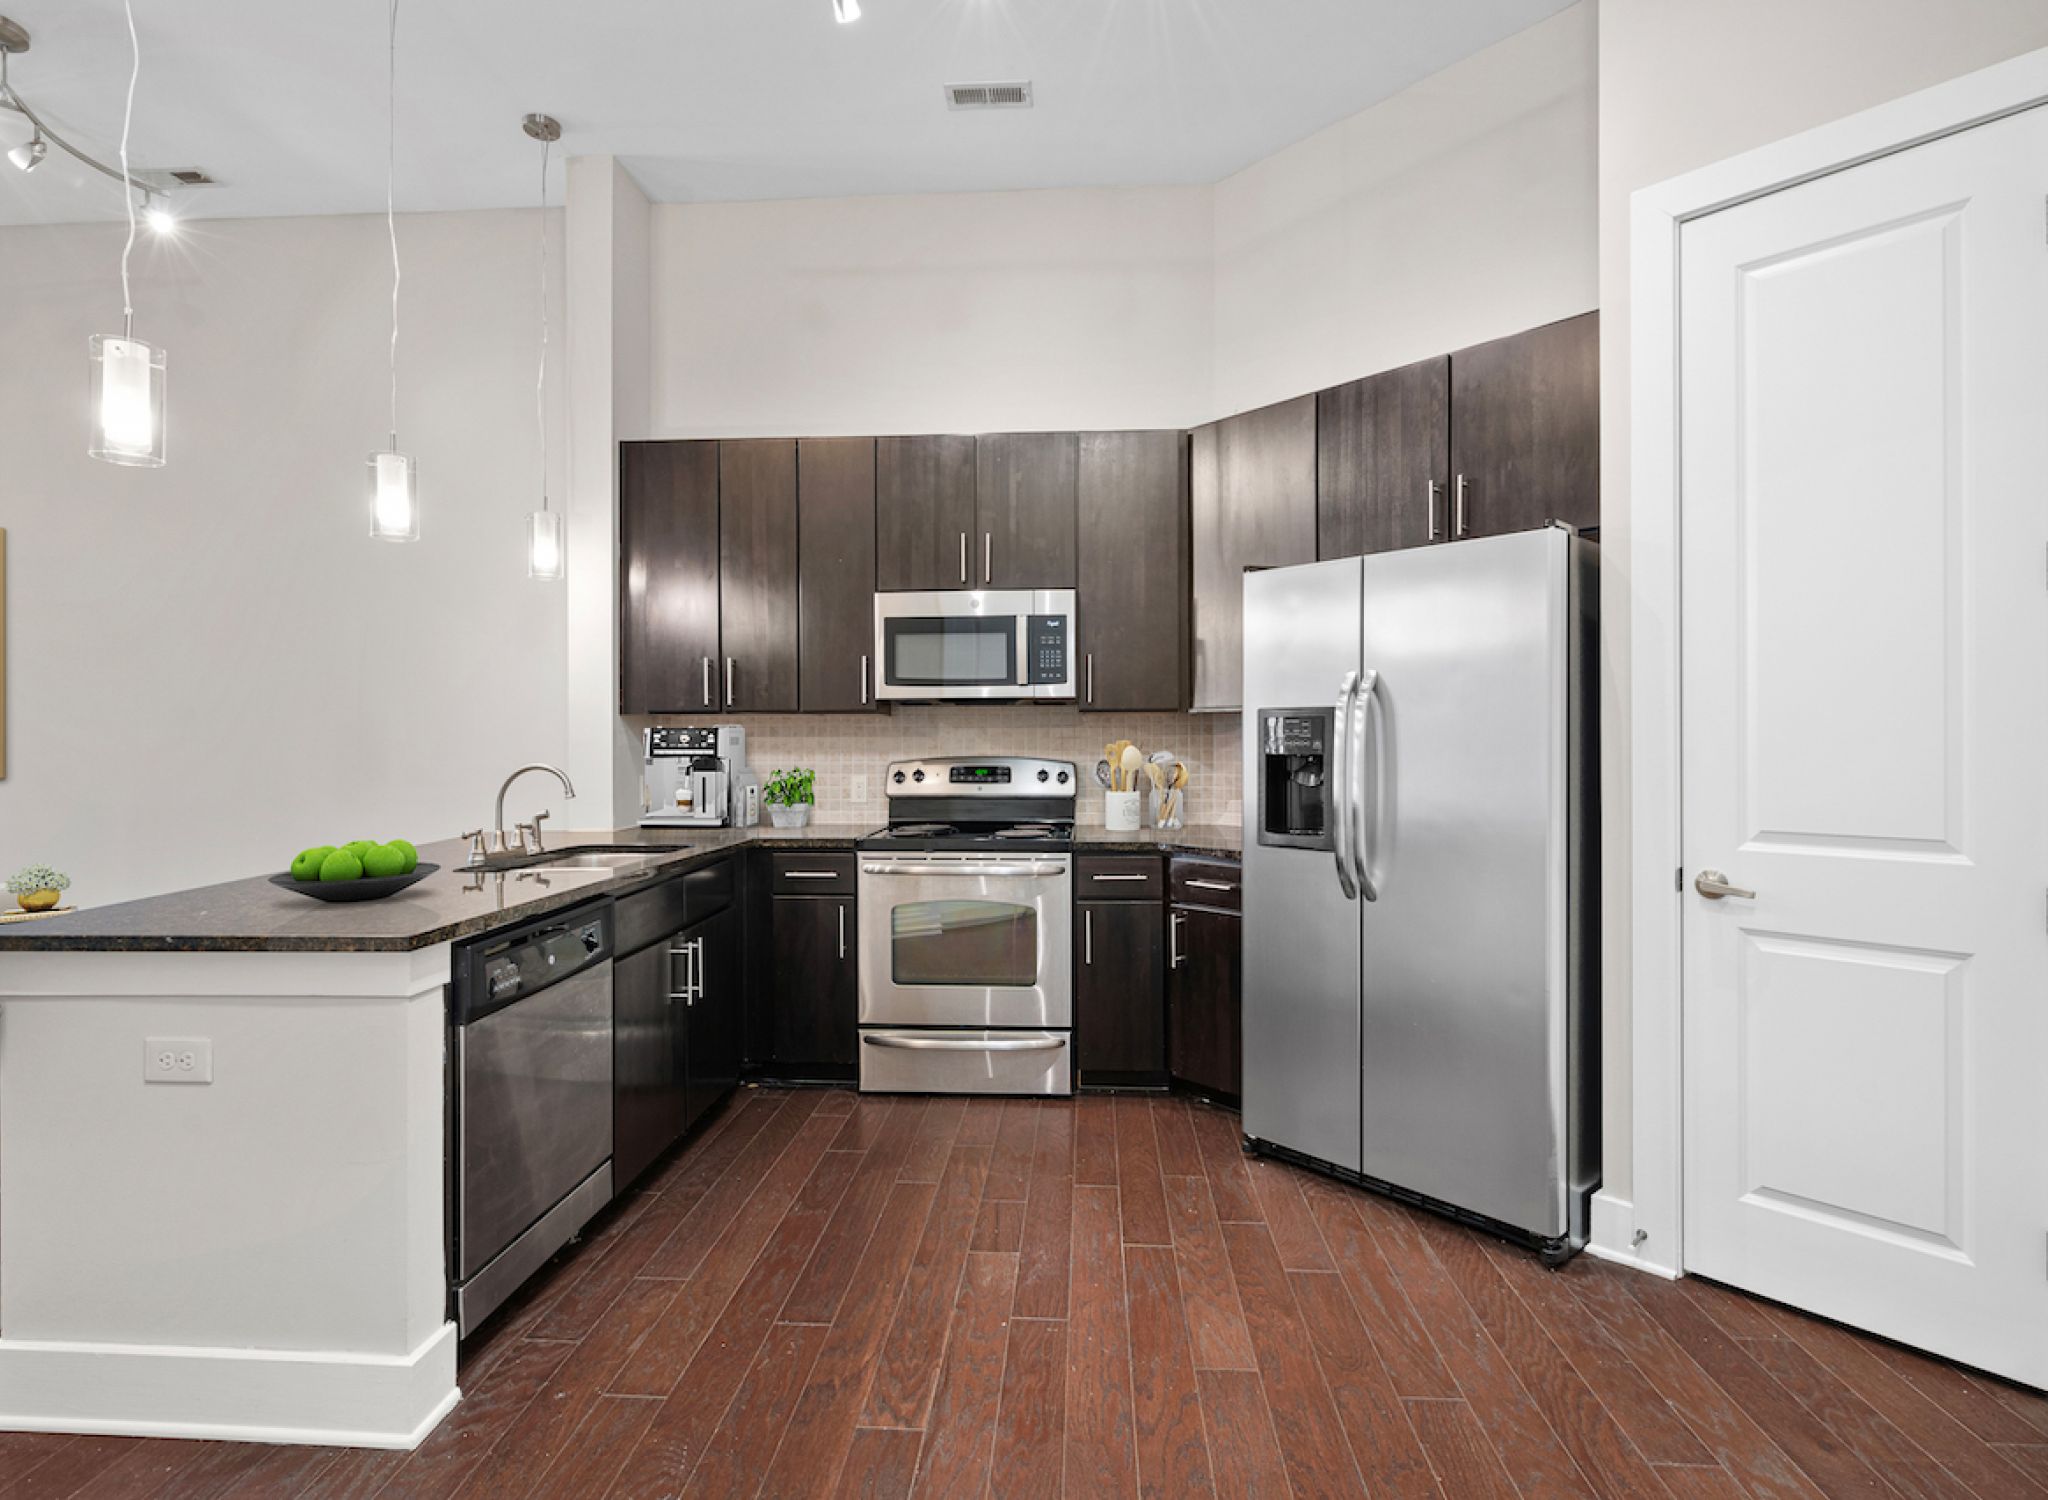 808 Hawthorne apartment kitchen with stainless steel appliances and granite countertops